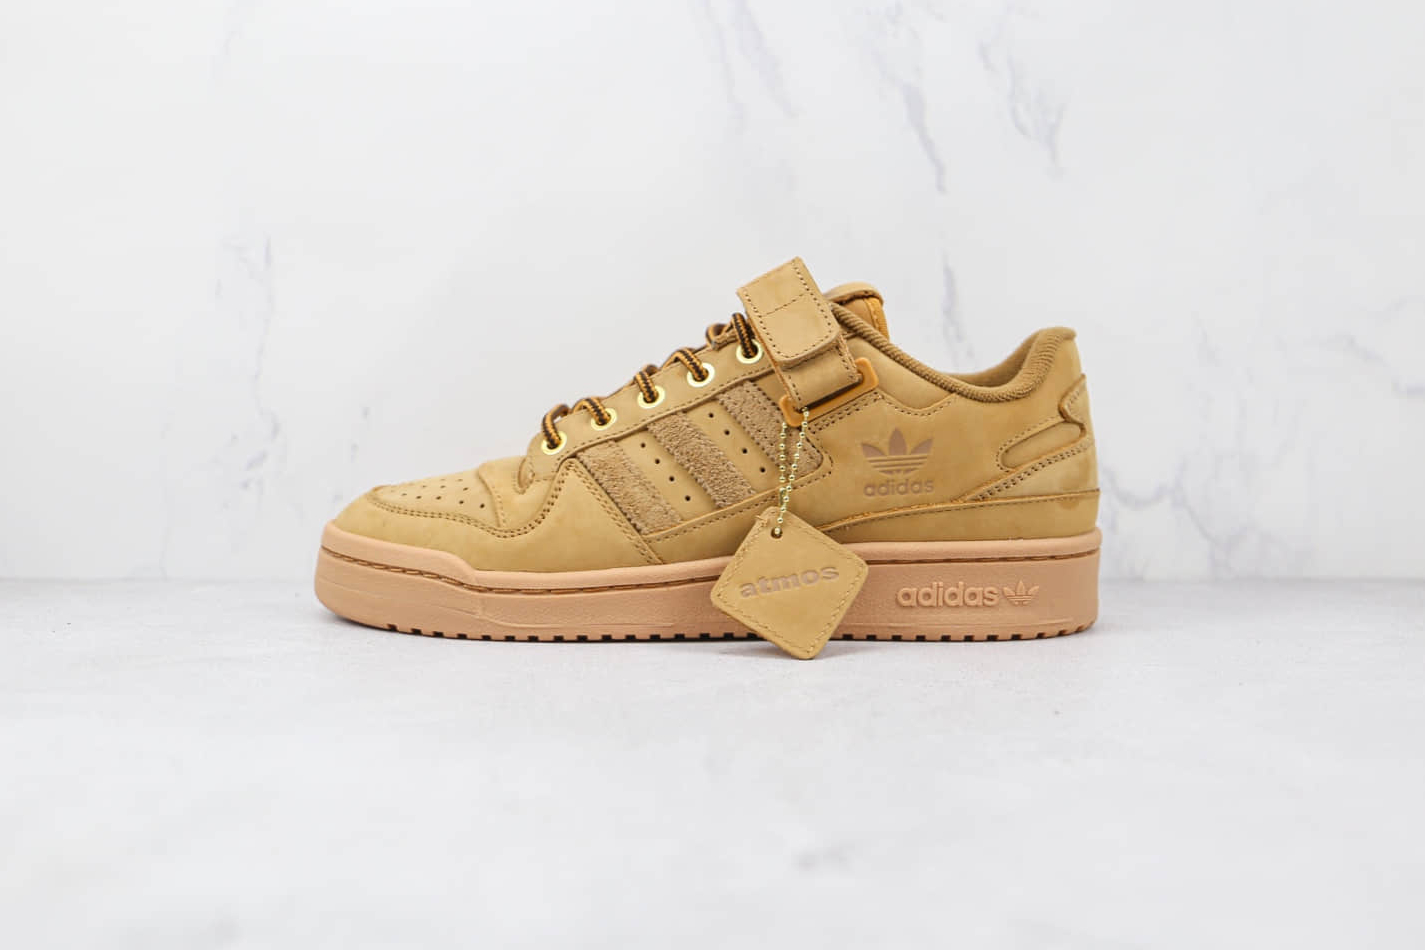 Atmos x Adidas Forum Low Wheat Sneakers Brown Yellow GX3953 - Shop Now